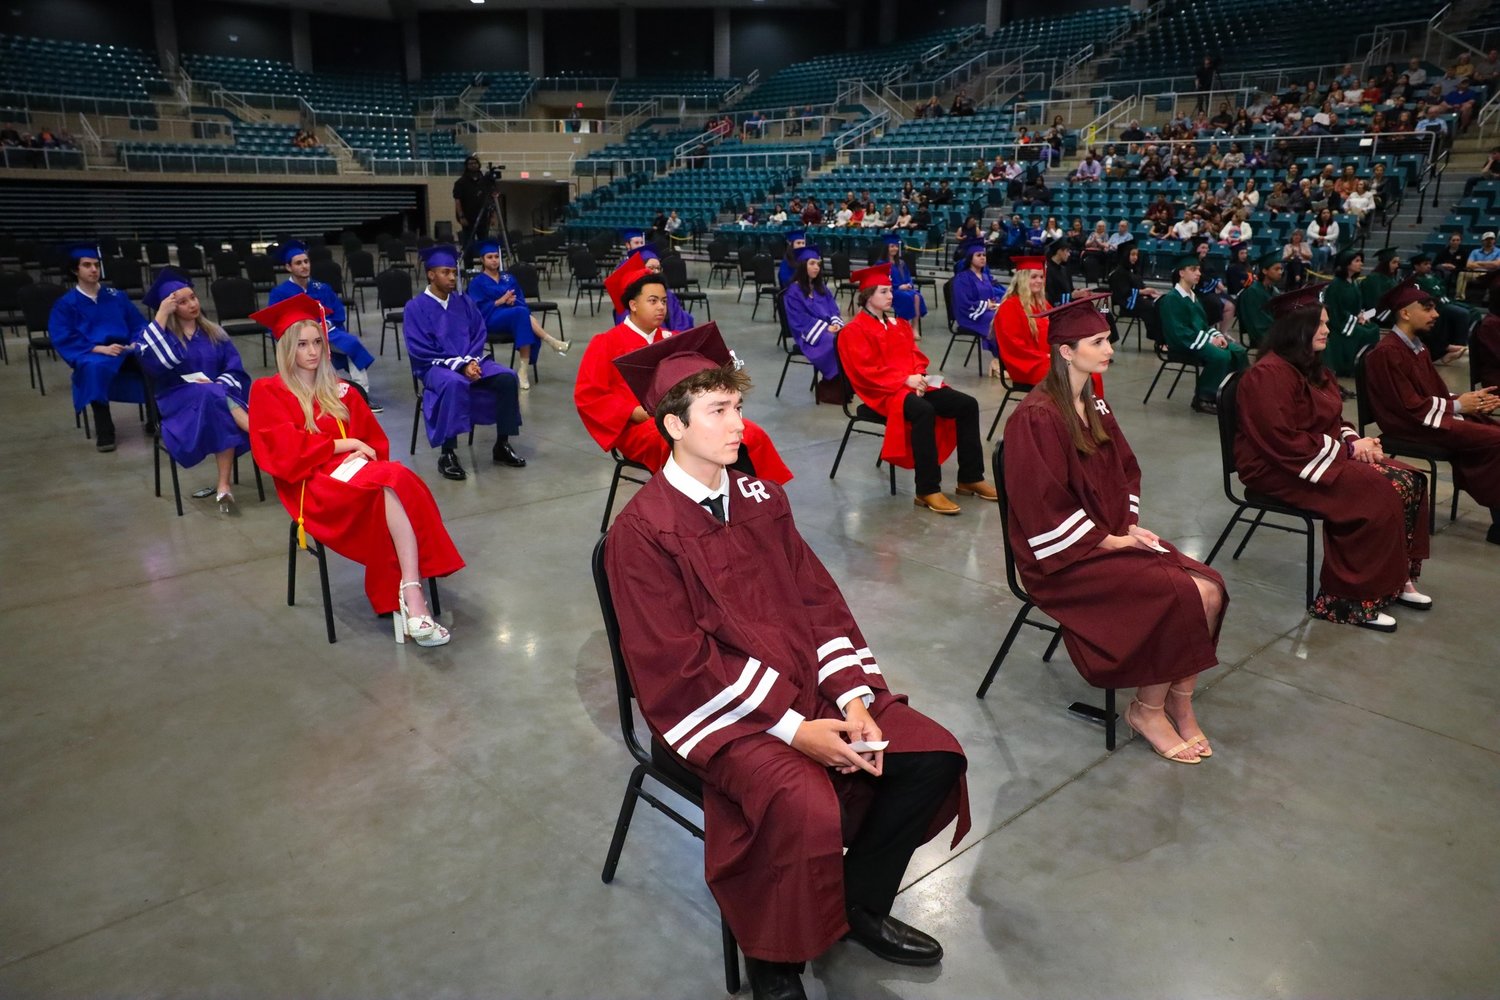 Winter graduates of Katy ISD high schools celebrated their commencement in a Jan. 18 ceremony at the Merrell Center, 6301 S. Stadium Dr.